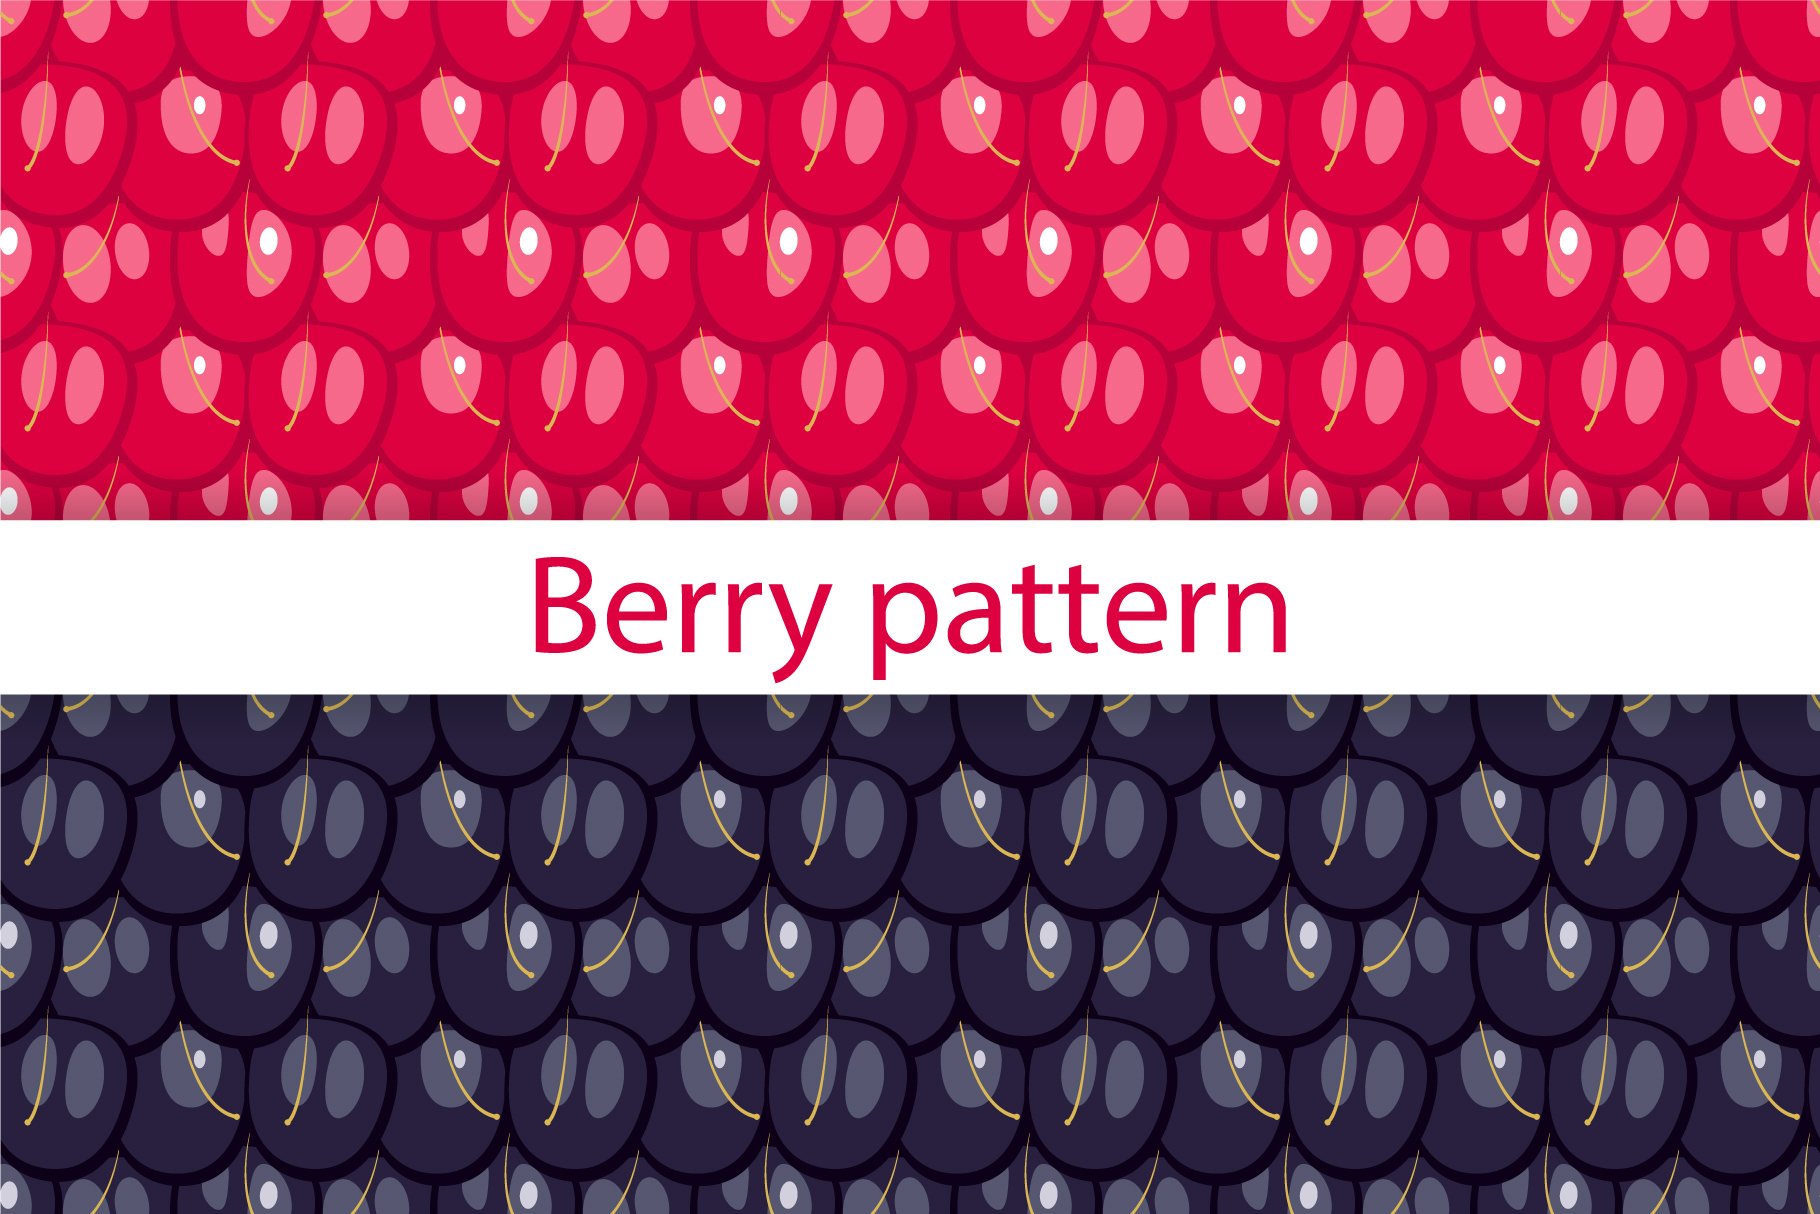 Berry texture, fruit pattern cover image.